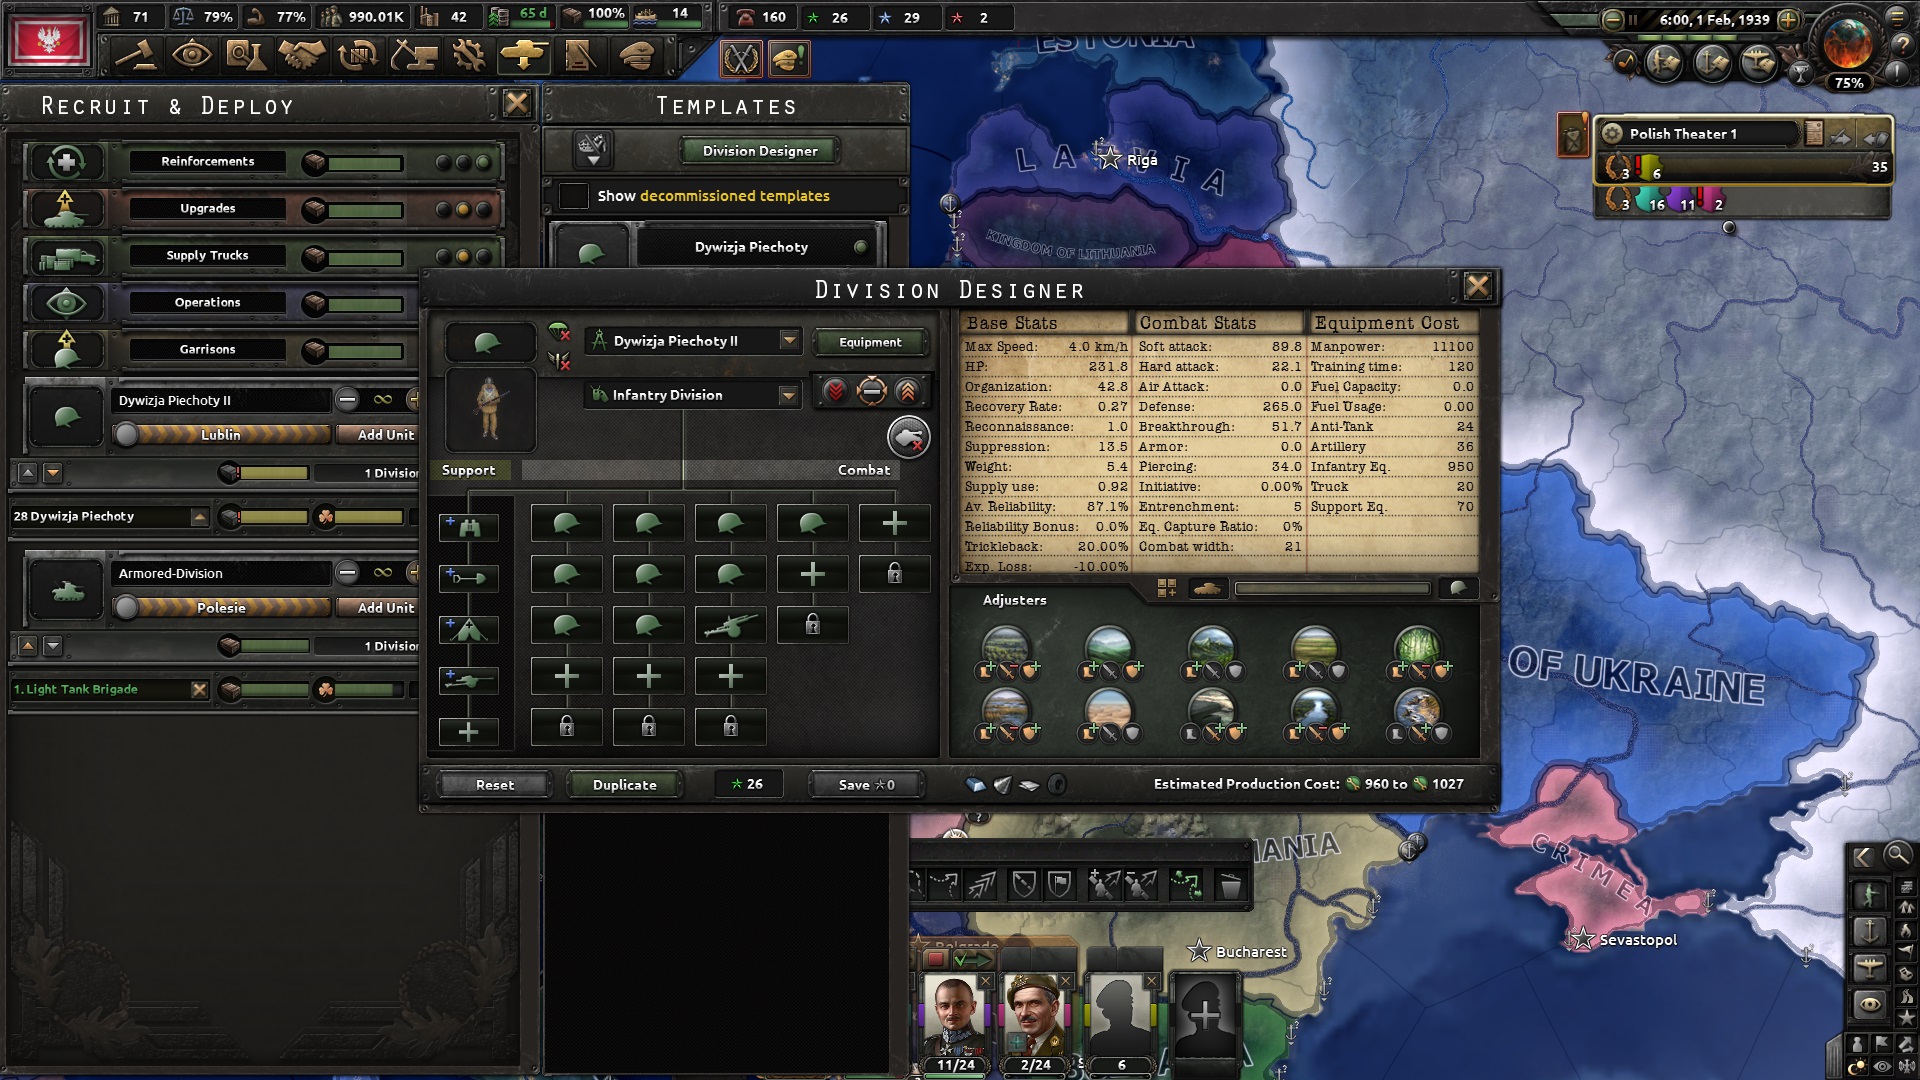 Hearts of Iron 4 meta – combat width, division templates, and more